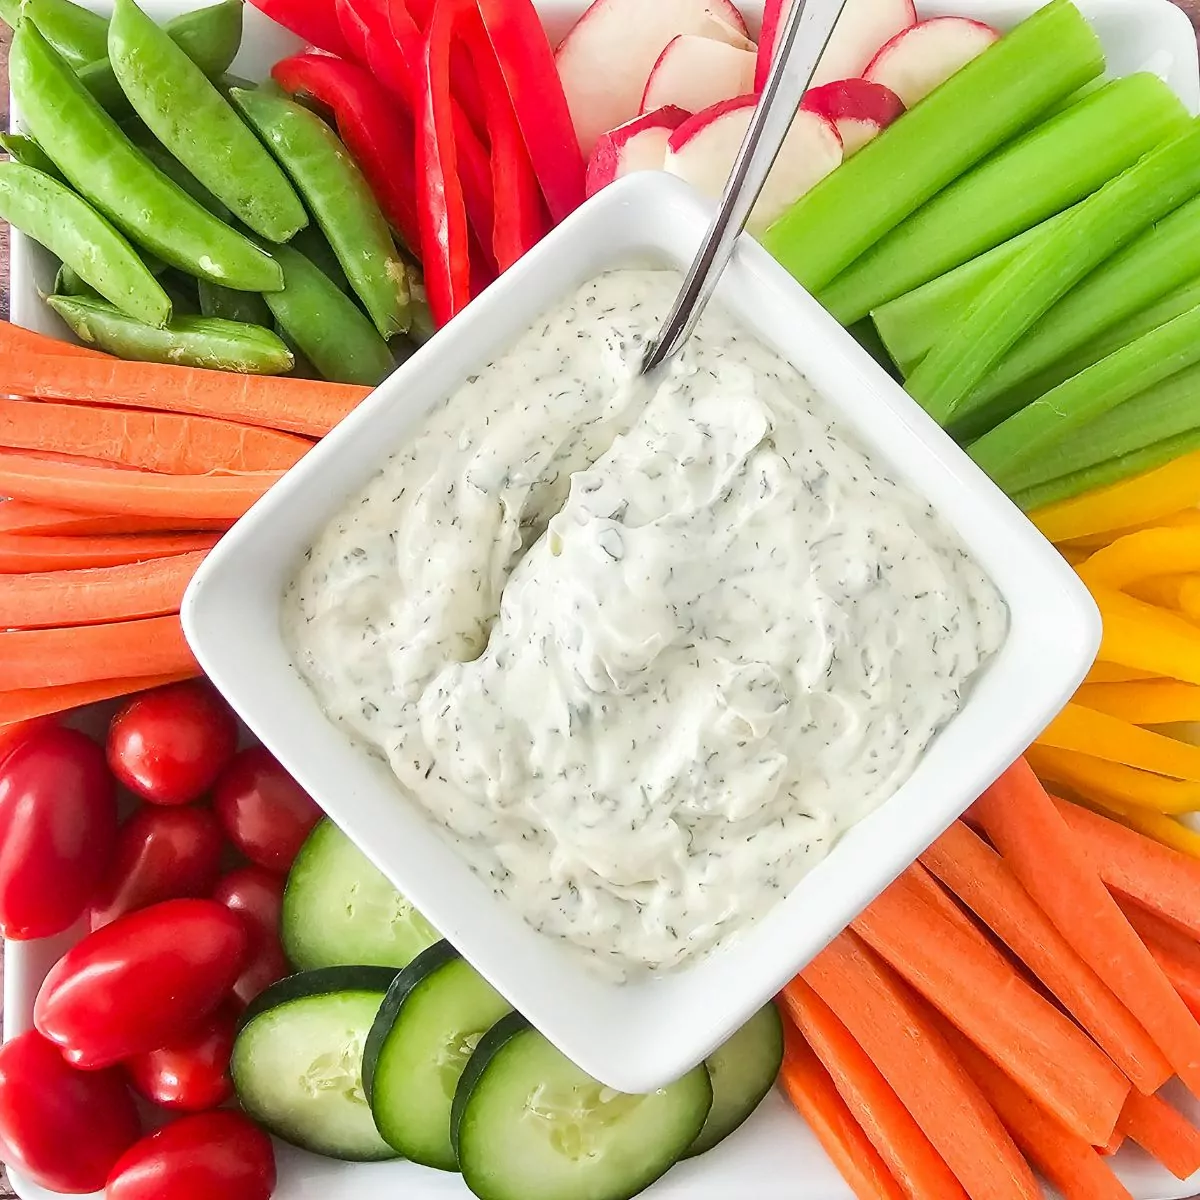 Homemade Dill Dip with veggies.